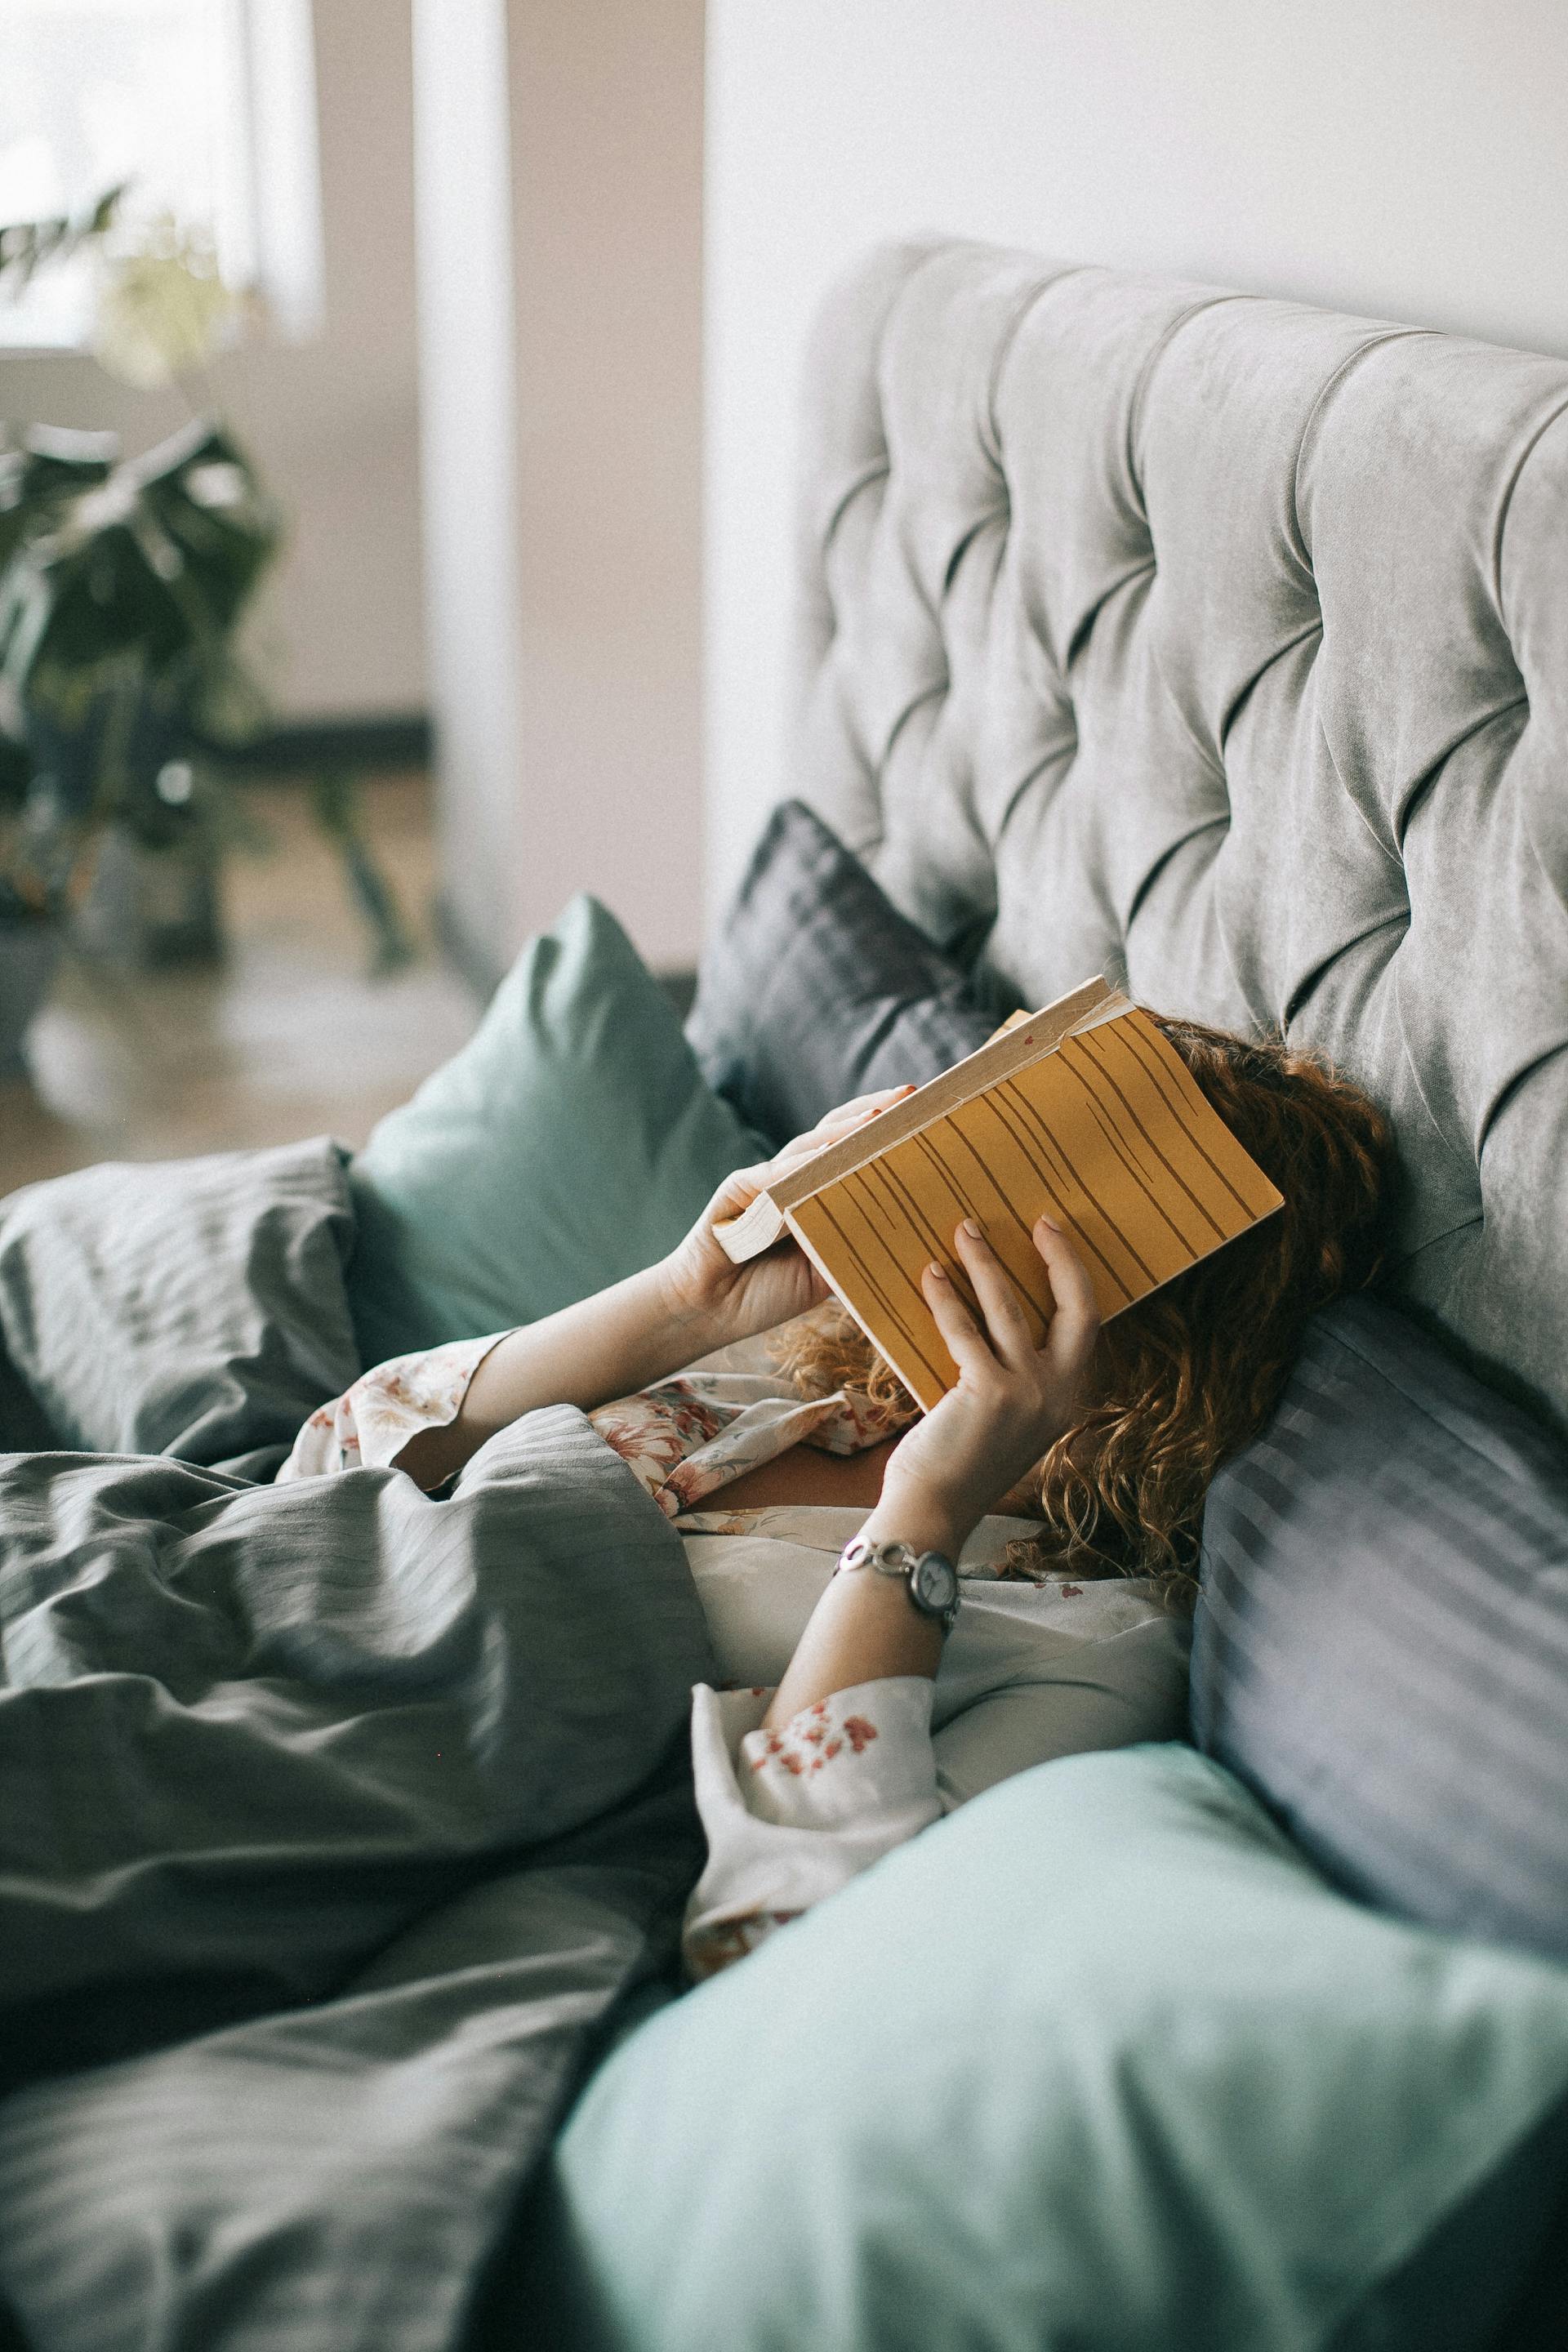 A person covering her face with a book | Source: Pexels